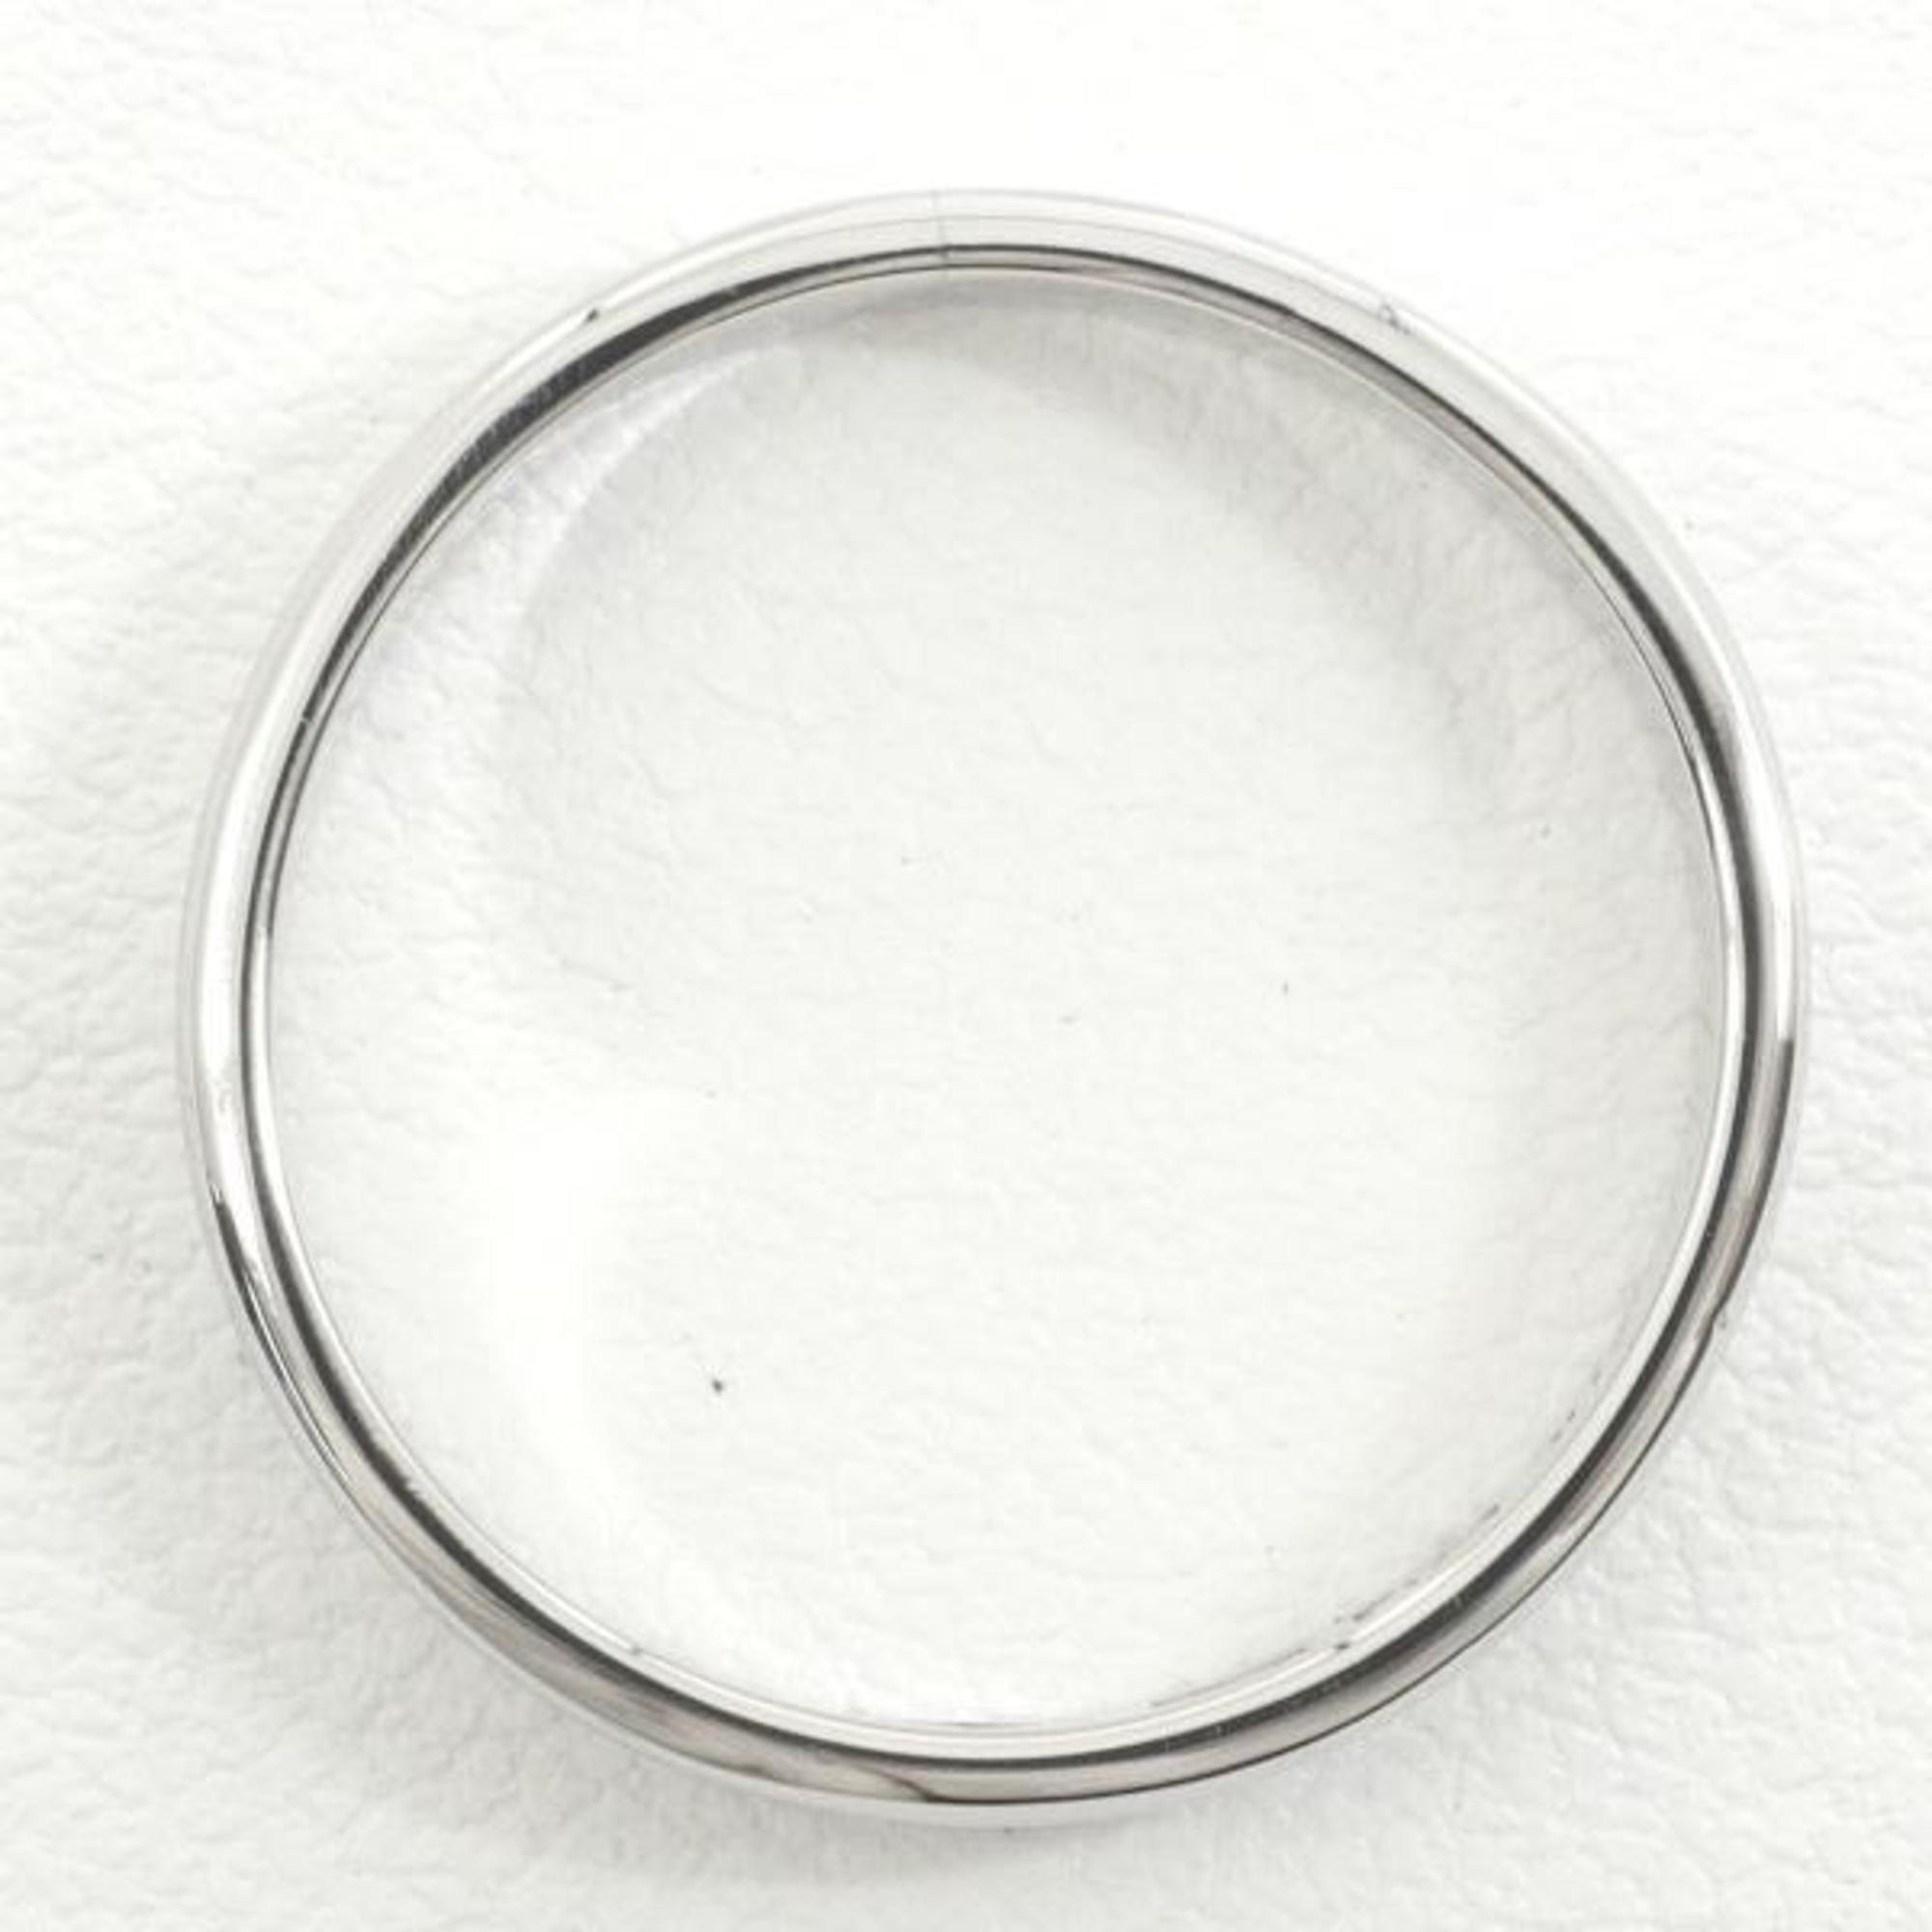 Seiko Jewelry PT850 Ring No. 5 Total Weight Approx. 2.7g